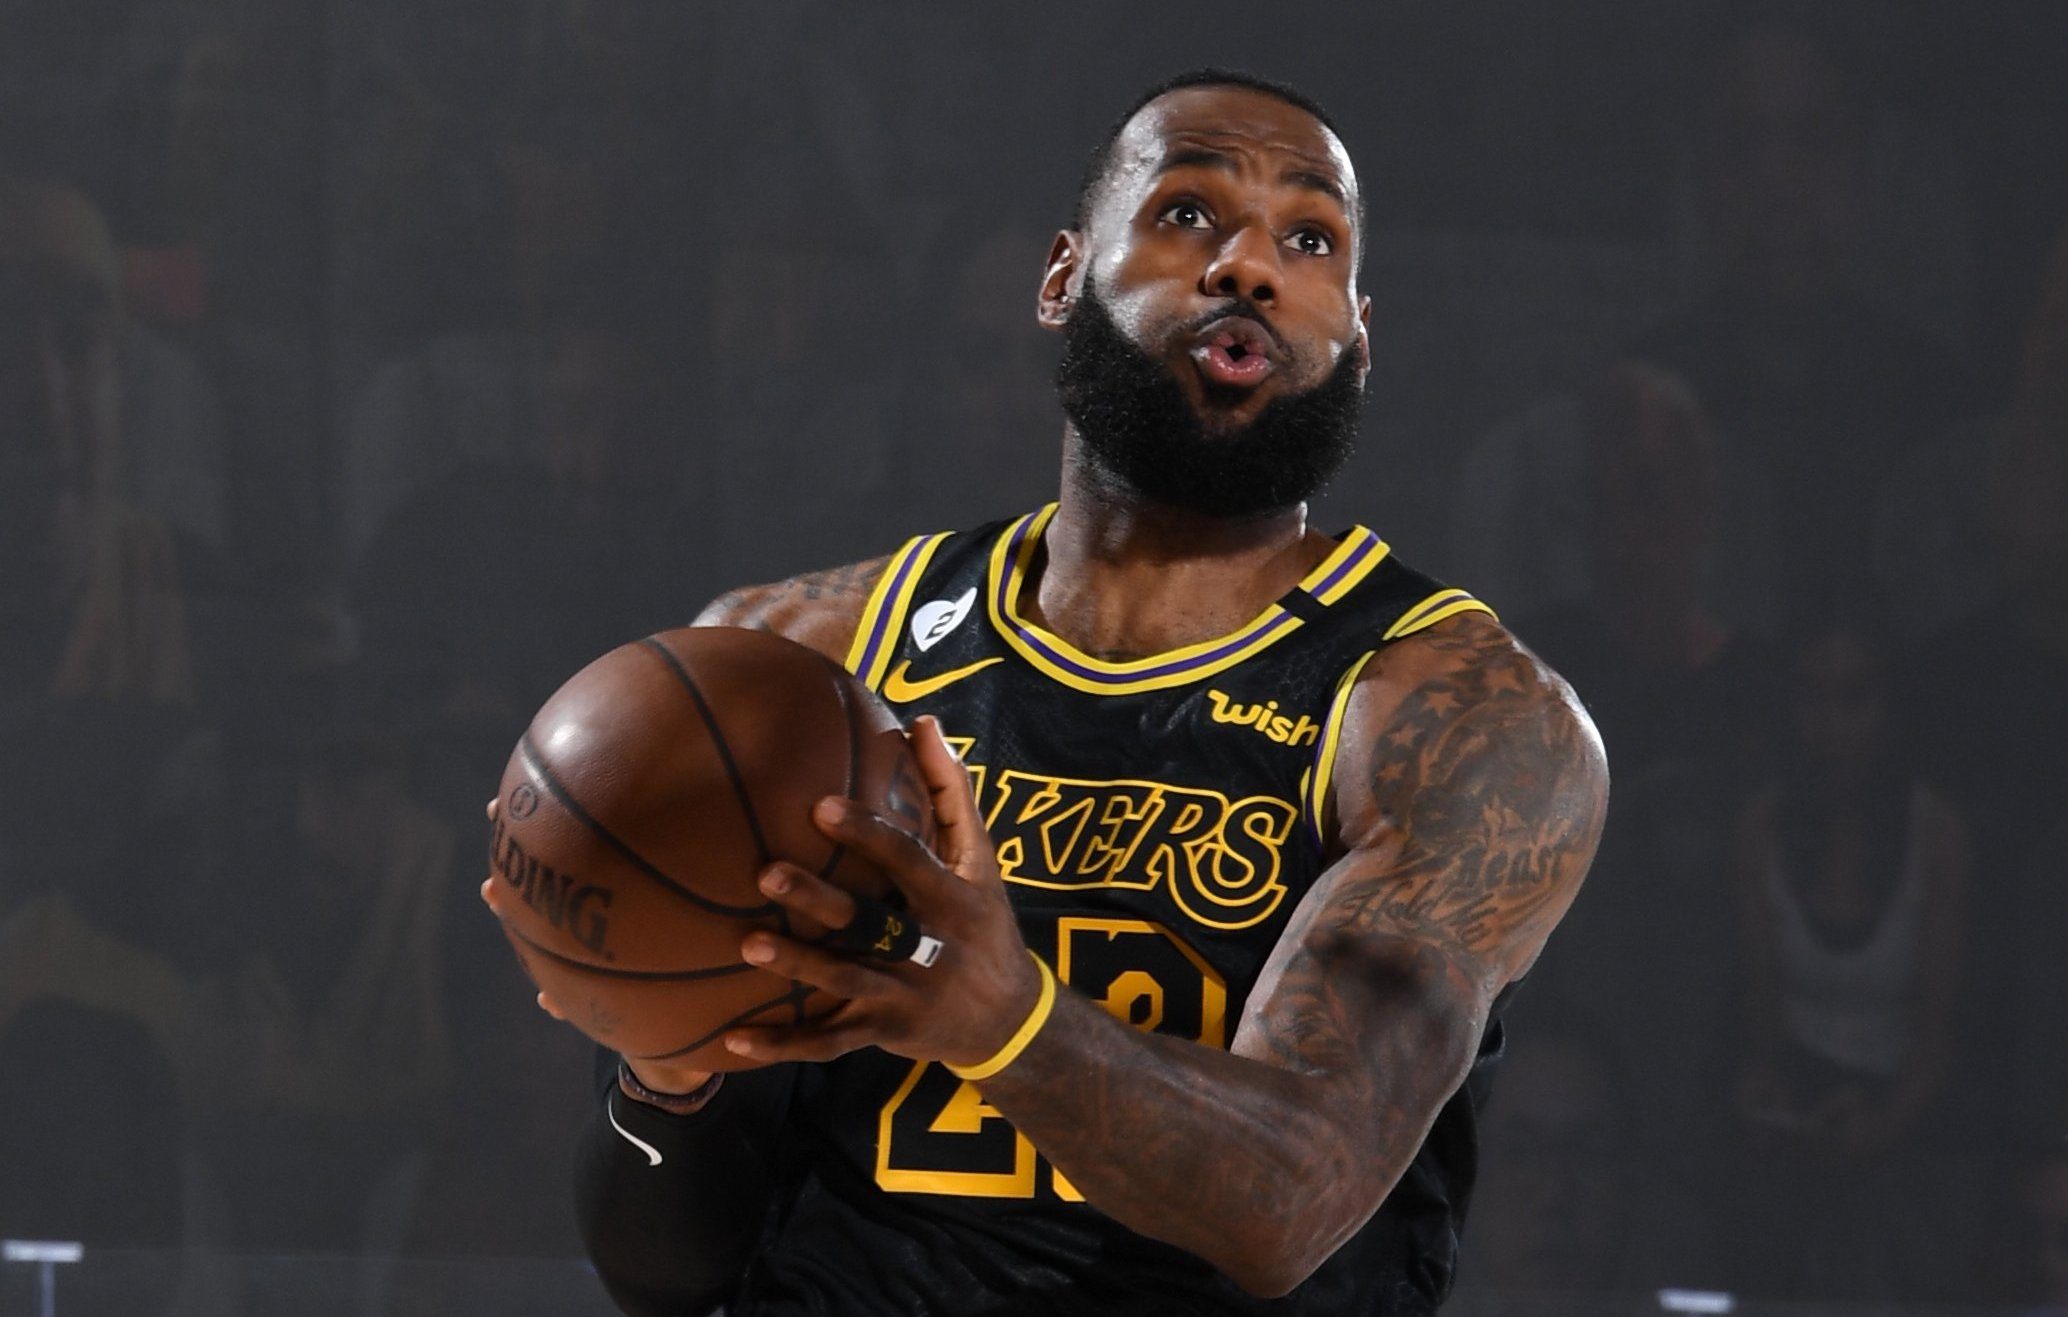 LeBron James is Time’s 2020 Athlete of the Year